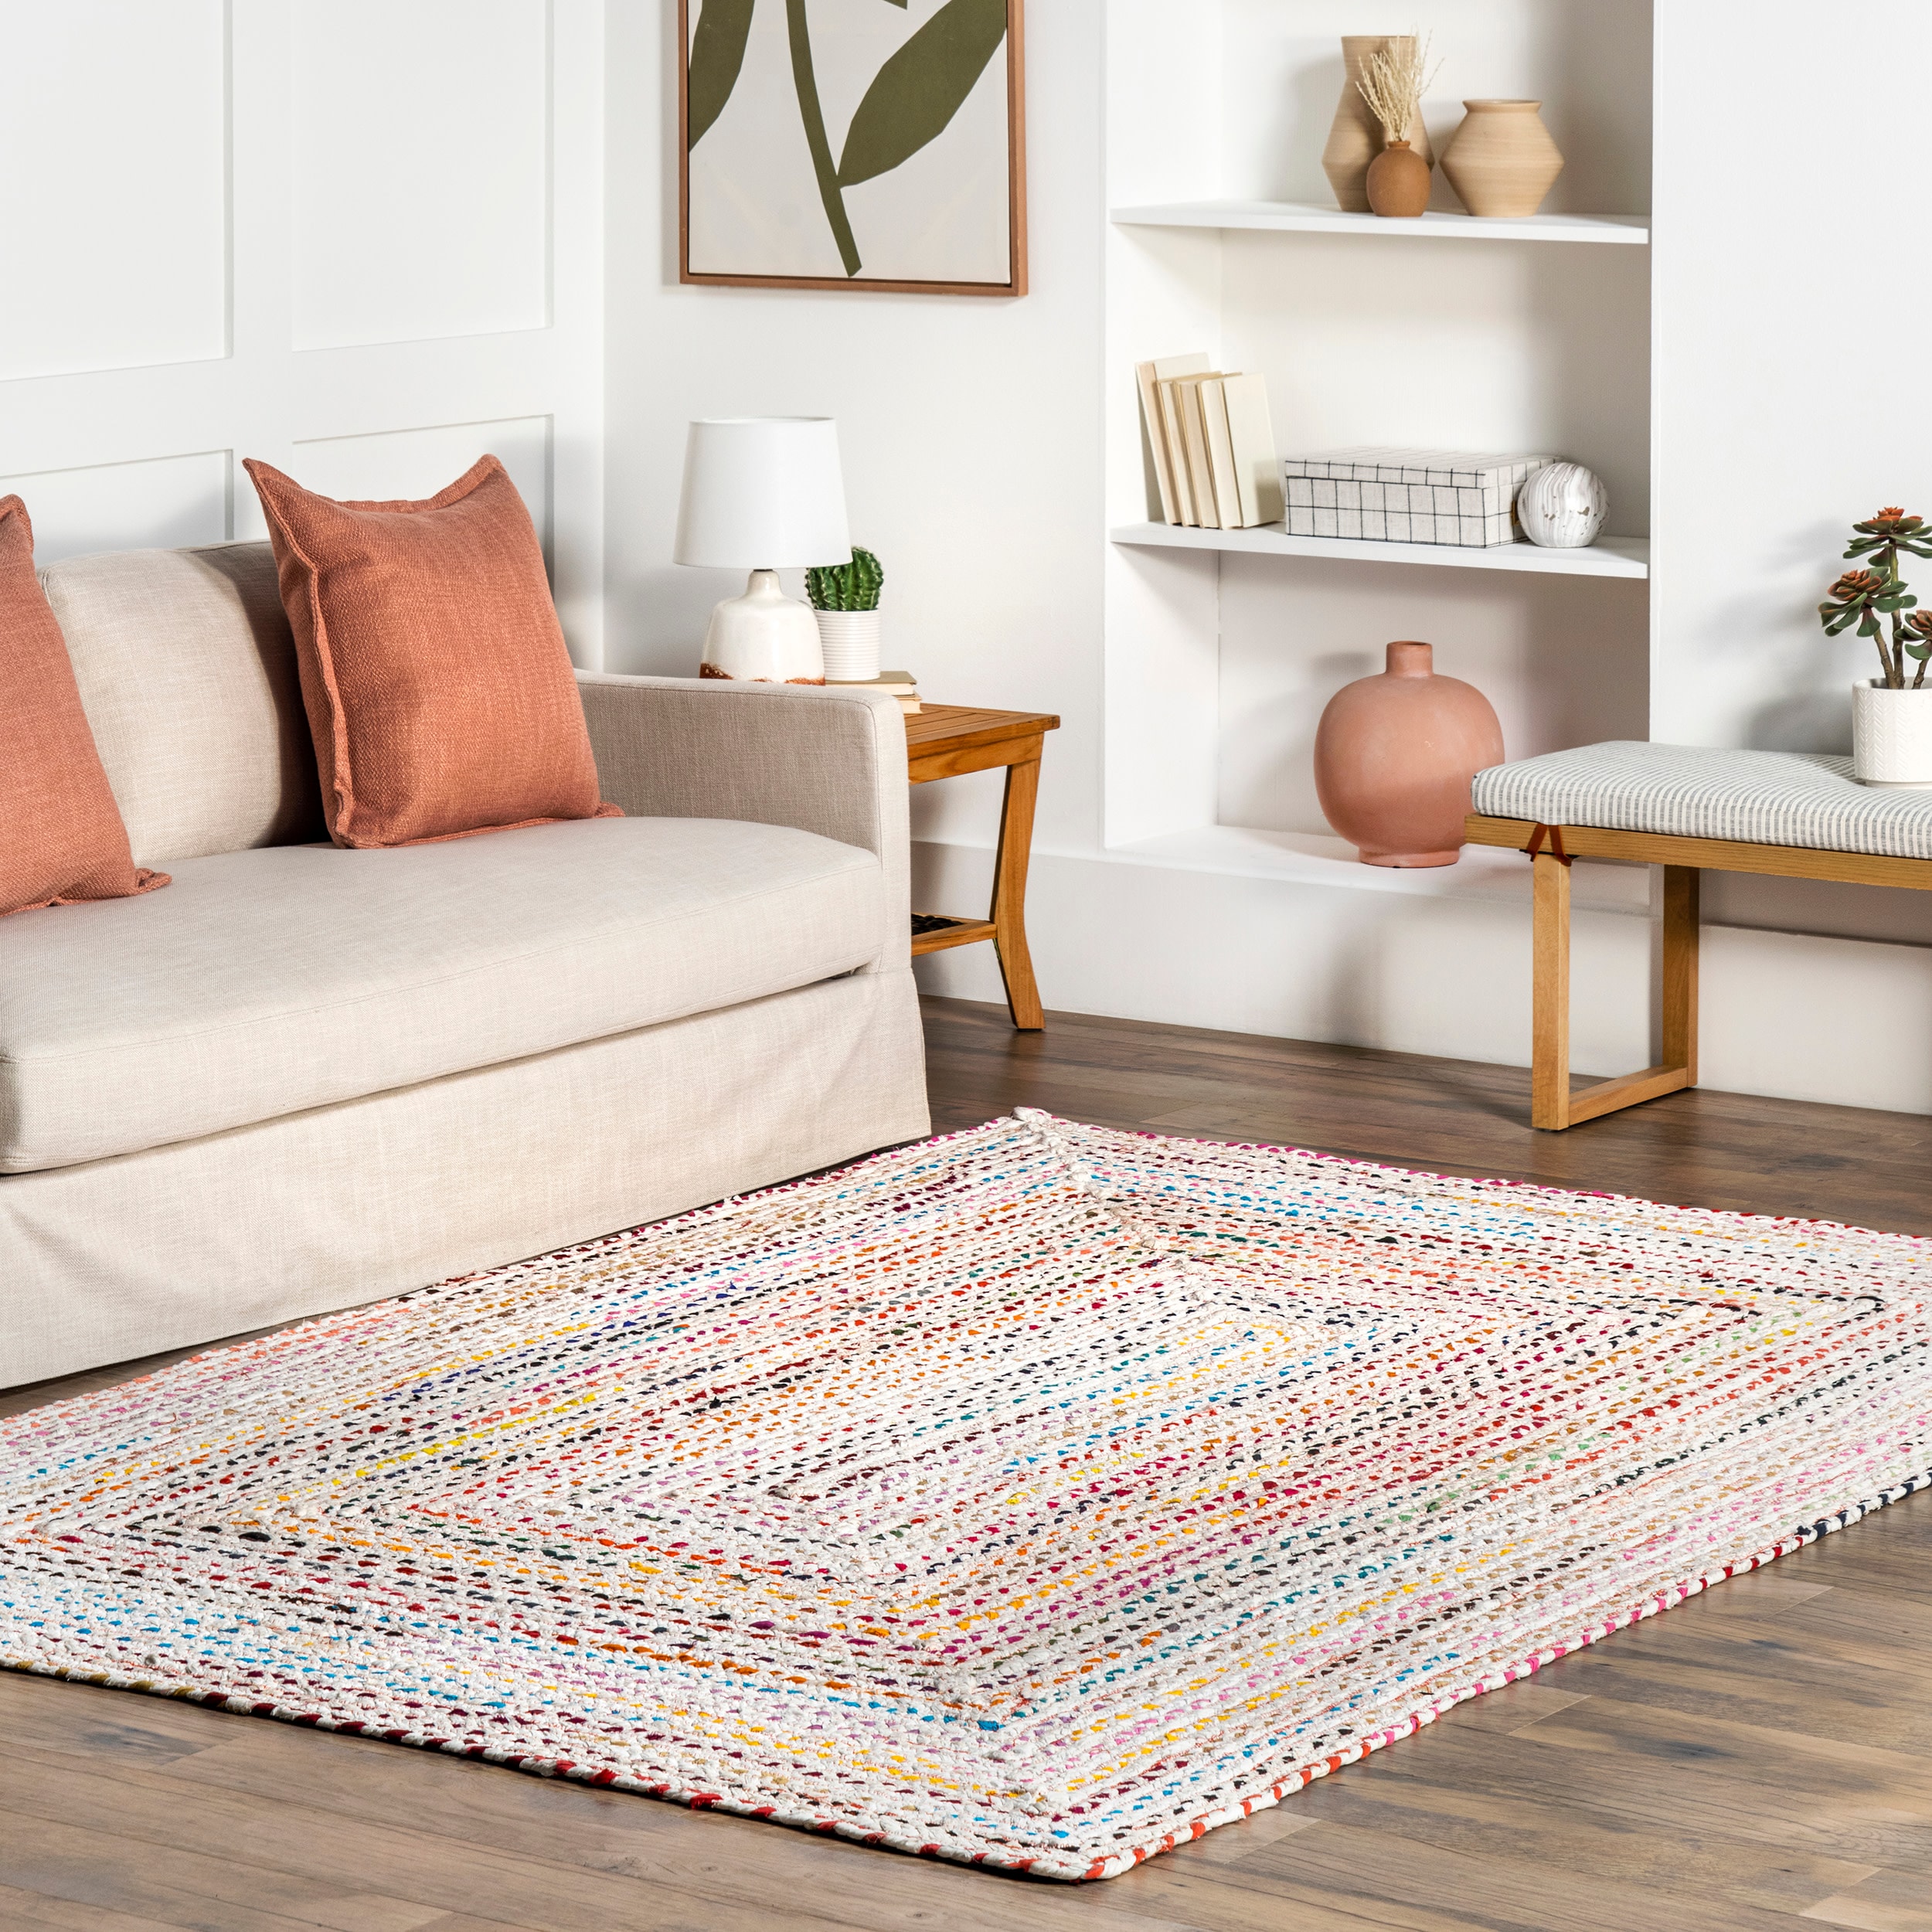 Braided RAG RUG 2 X 14 Ft Chindi Area RUG for Living Room Indoor Rugs